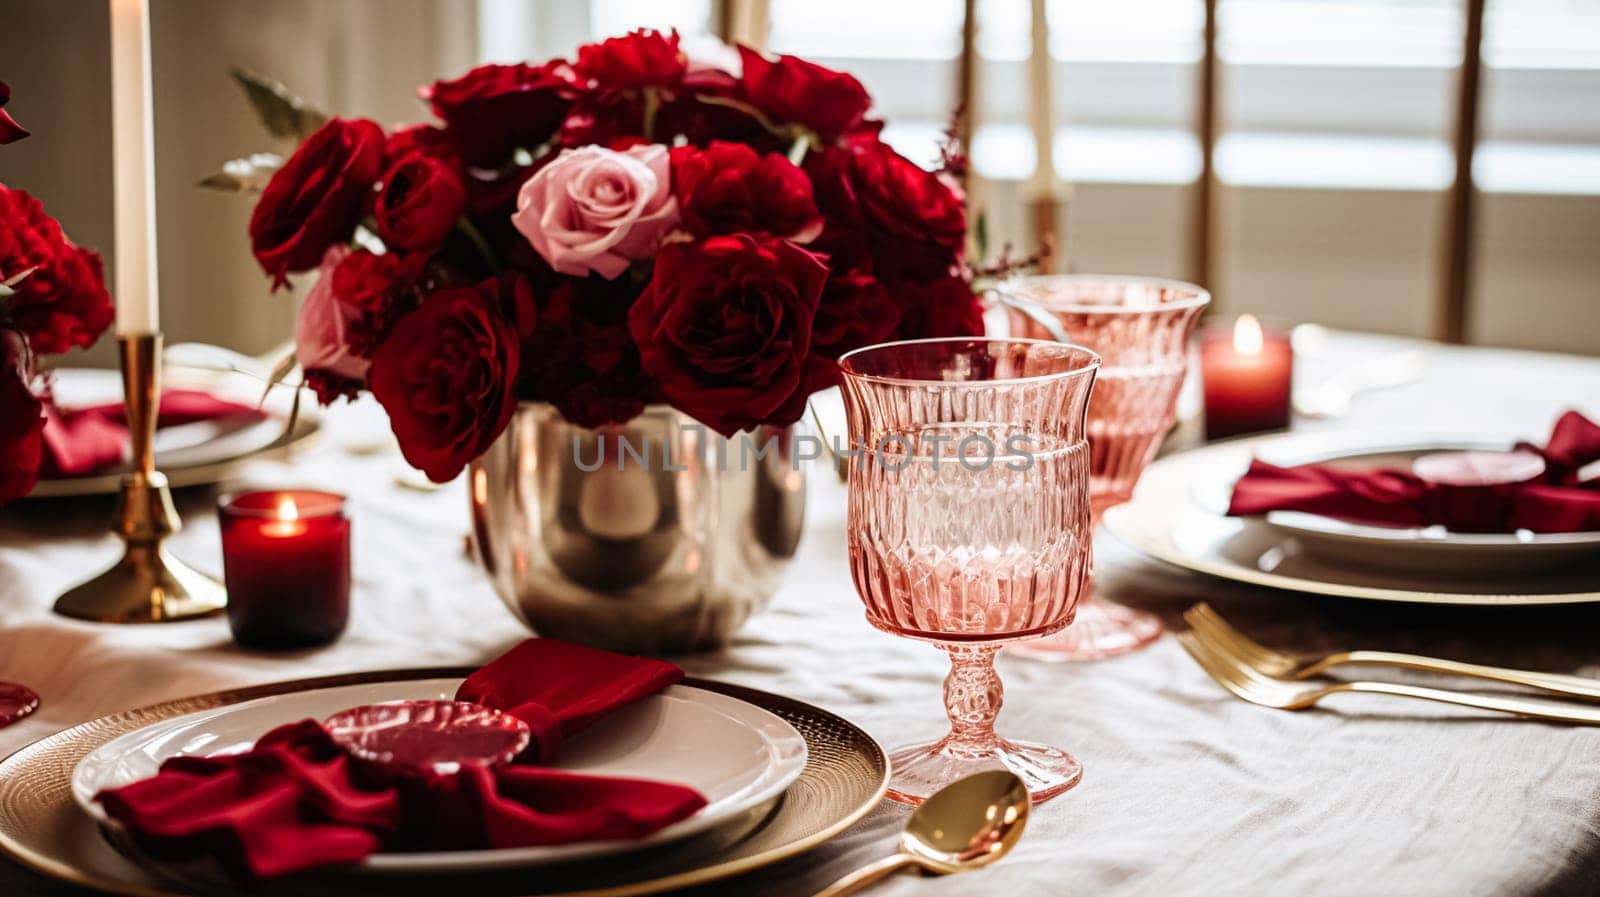 Festive table setting with cutlery, candles and beautiful red flowers by Olayola